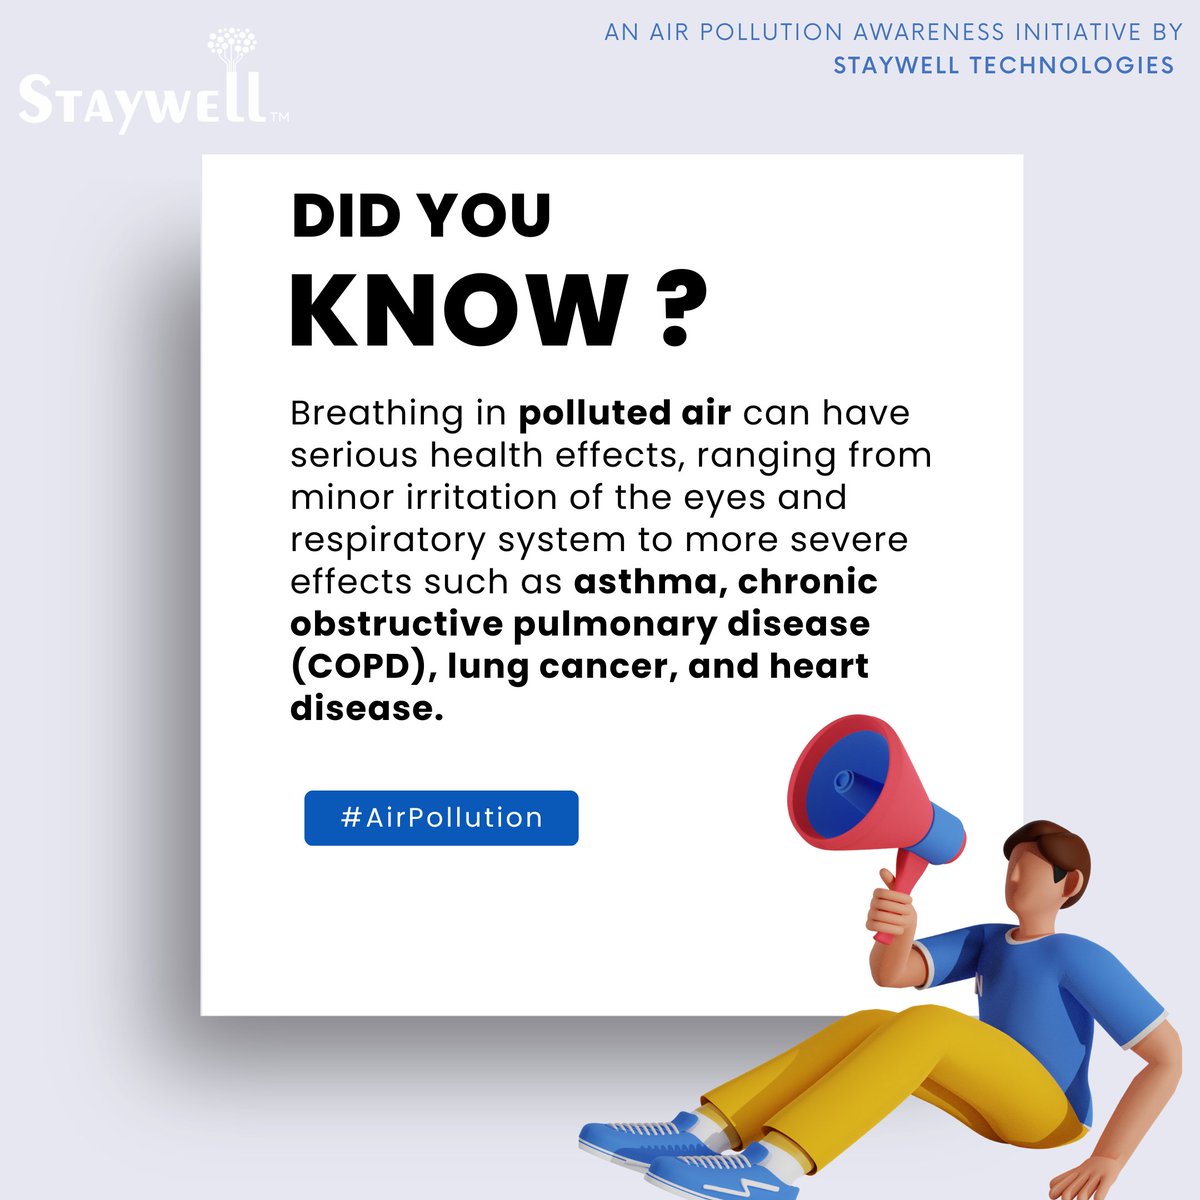 Did You Know?
#AirPollutionHealthEffects #BreatheClean #HealthyAirHealthyLife #CleanAirMatters #PollutionAwareness #ProtectYourLungs #AirQualityAwareness #CleanAirForAll #HealthyHabitsForLife #ReduceAirPollution #CleanAirNow #DidYouKnow